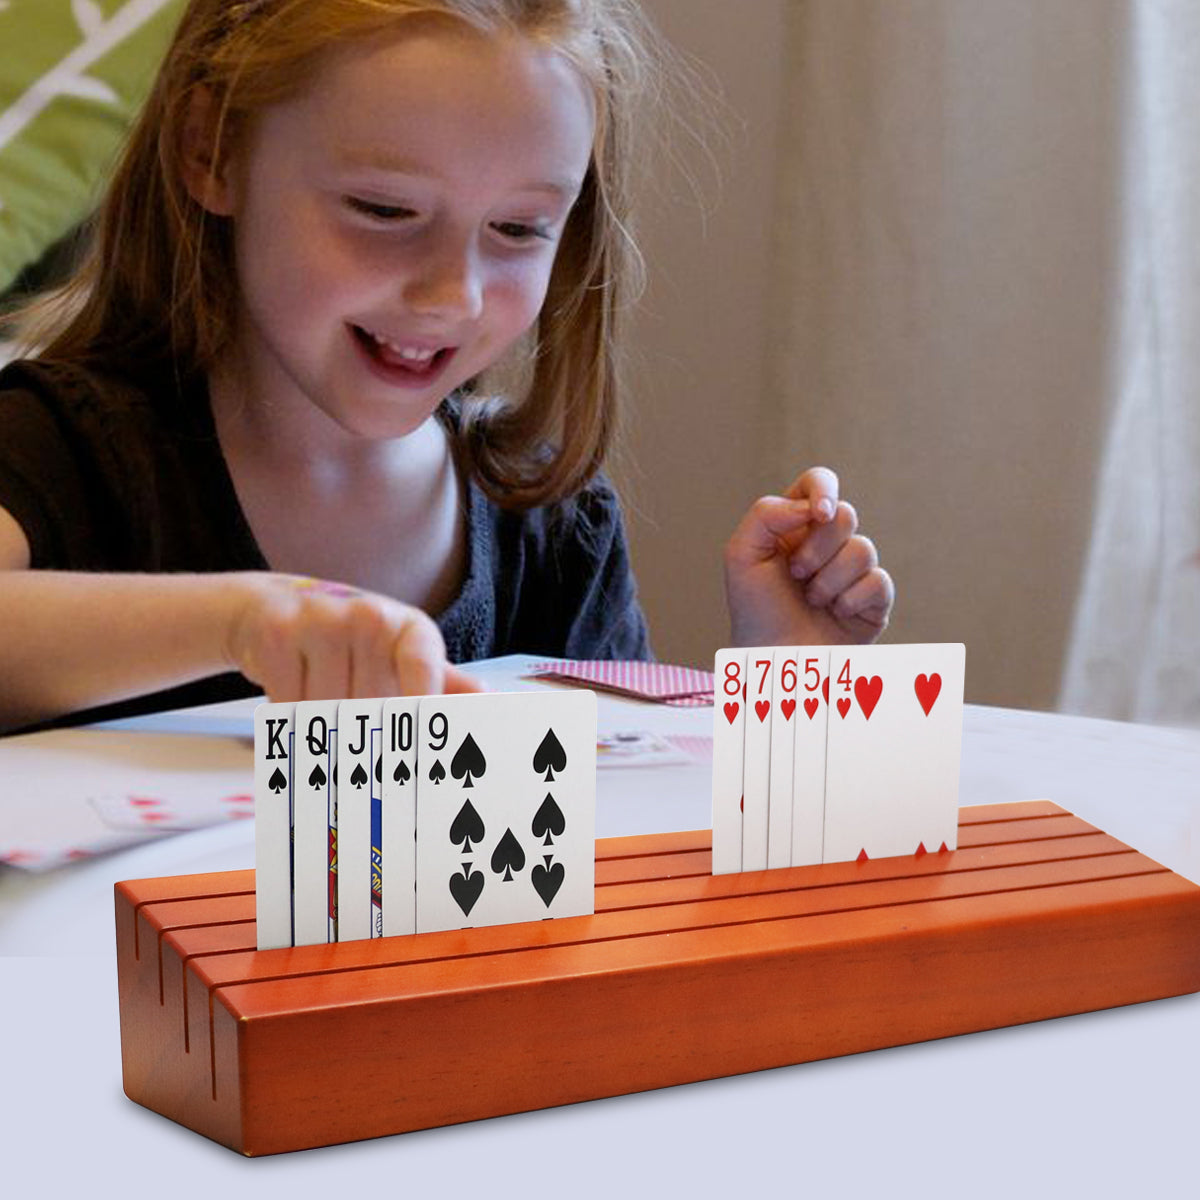 Buying a Bridge Kit? We've Found the Best! - Gifts for Card Players